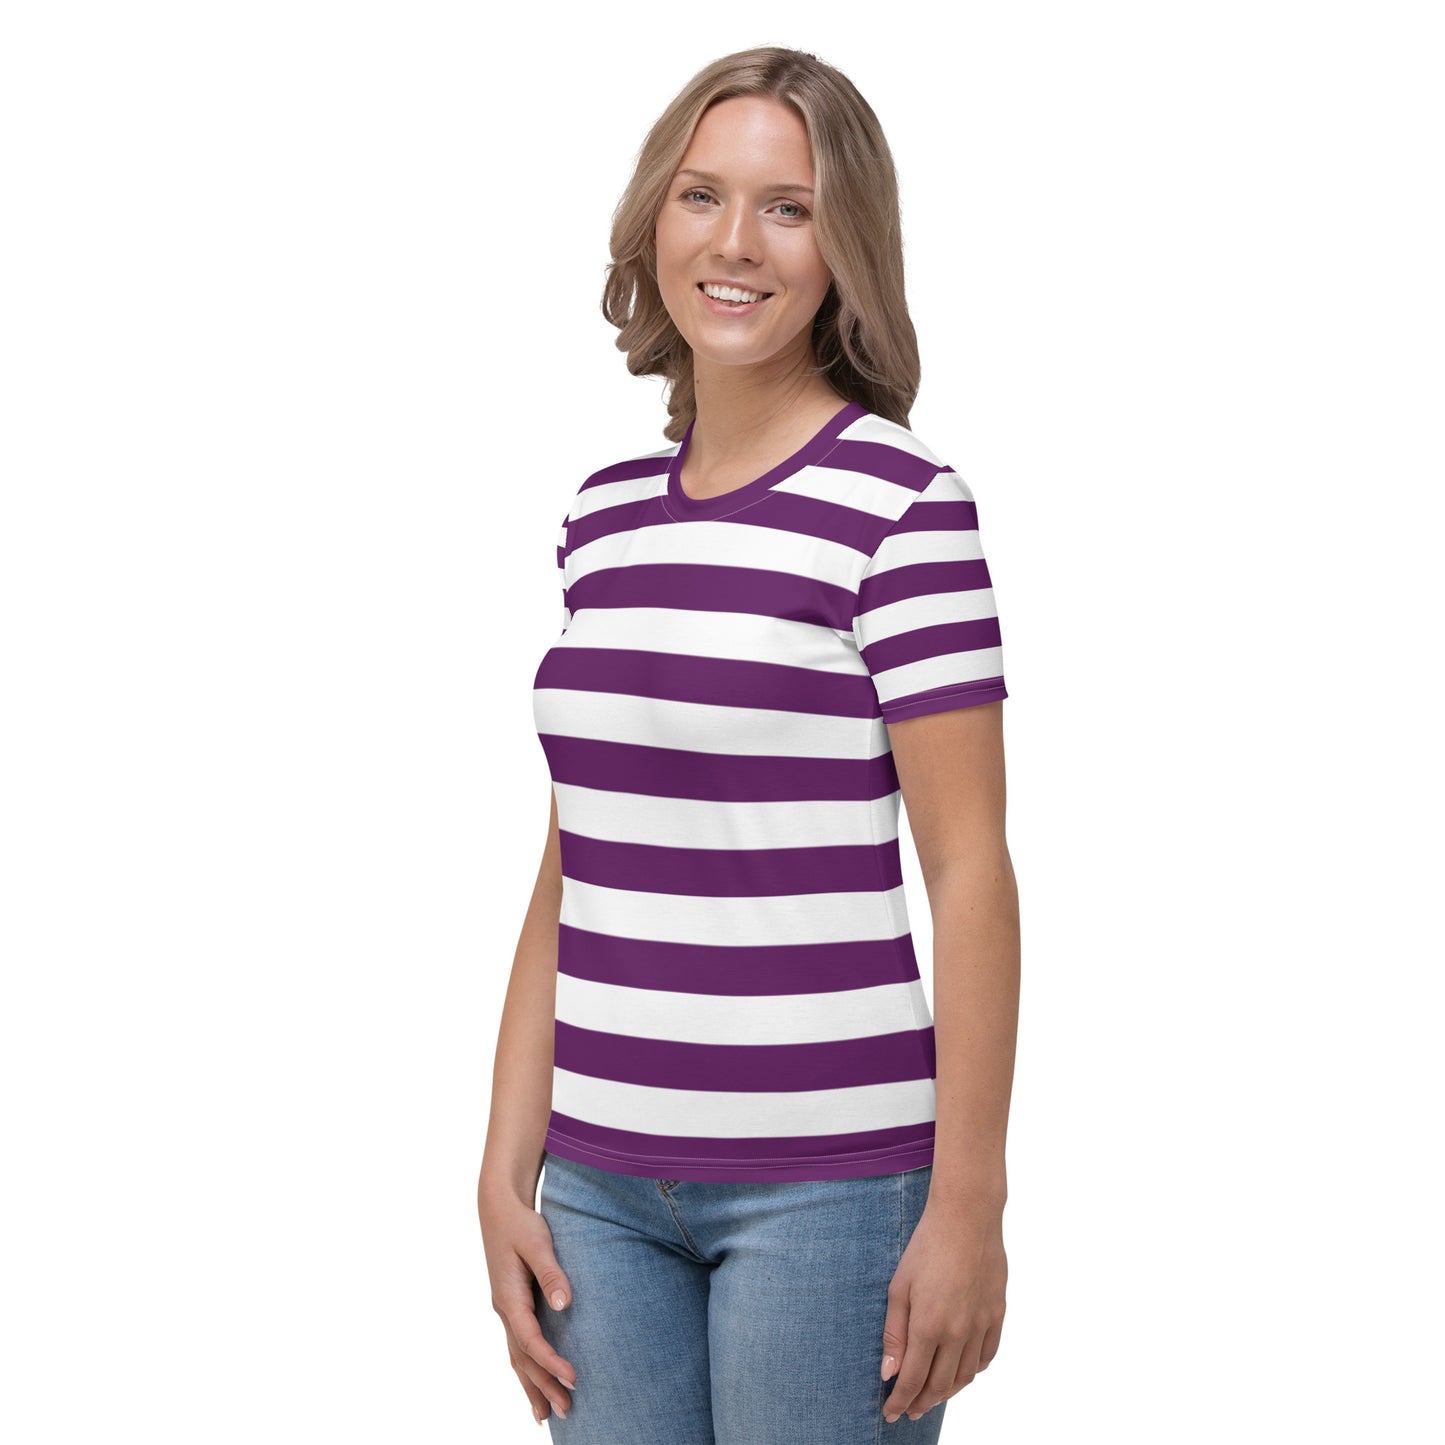 Purple And White Striped Tshirt For Women